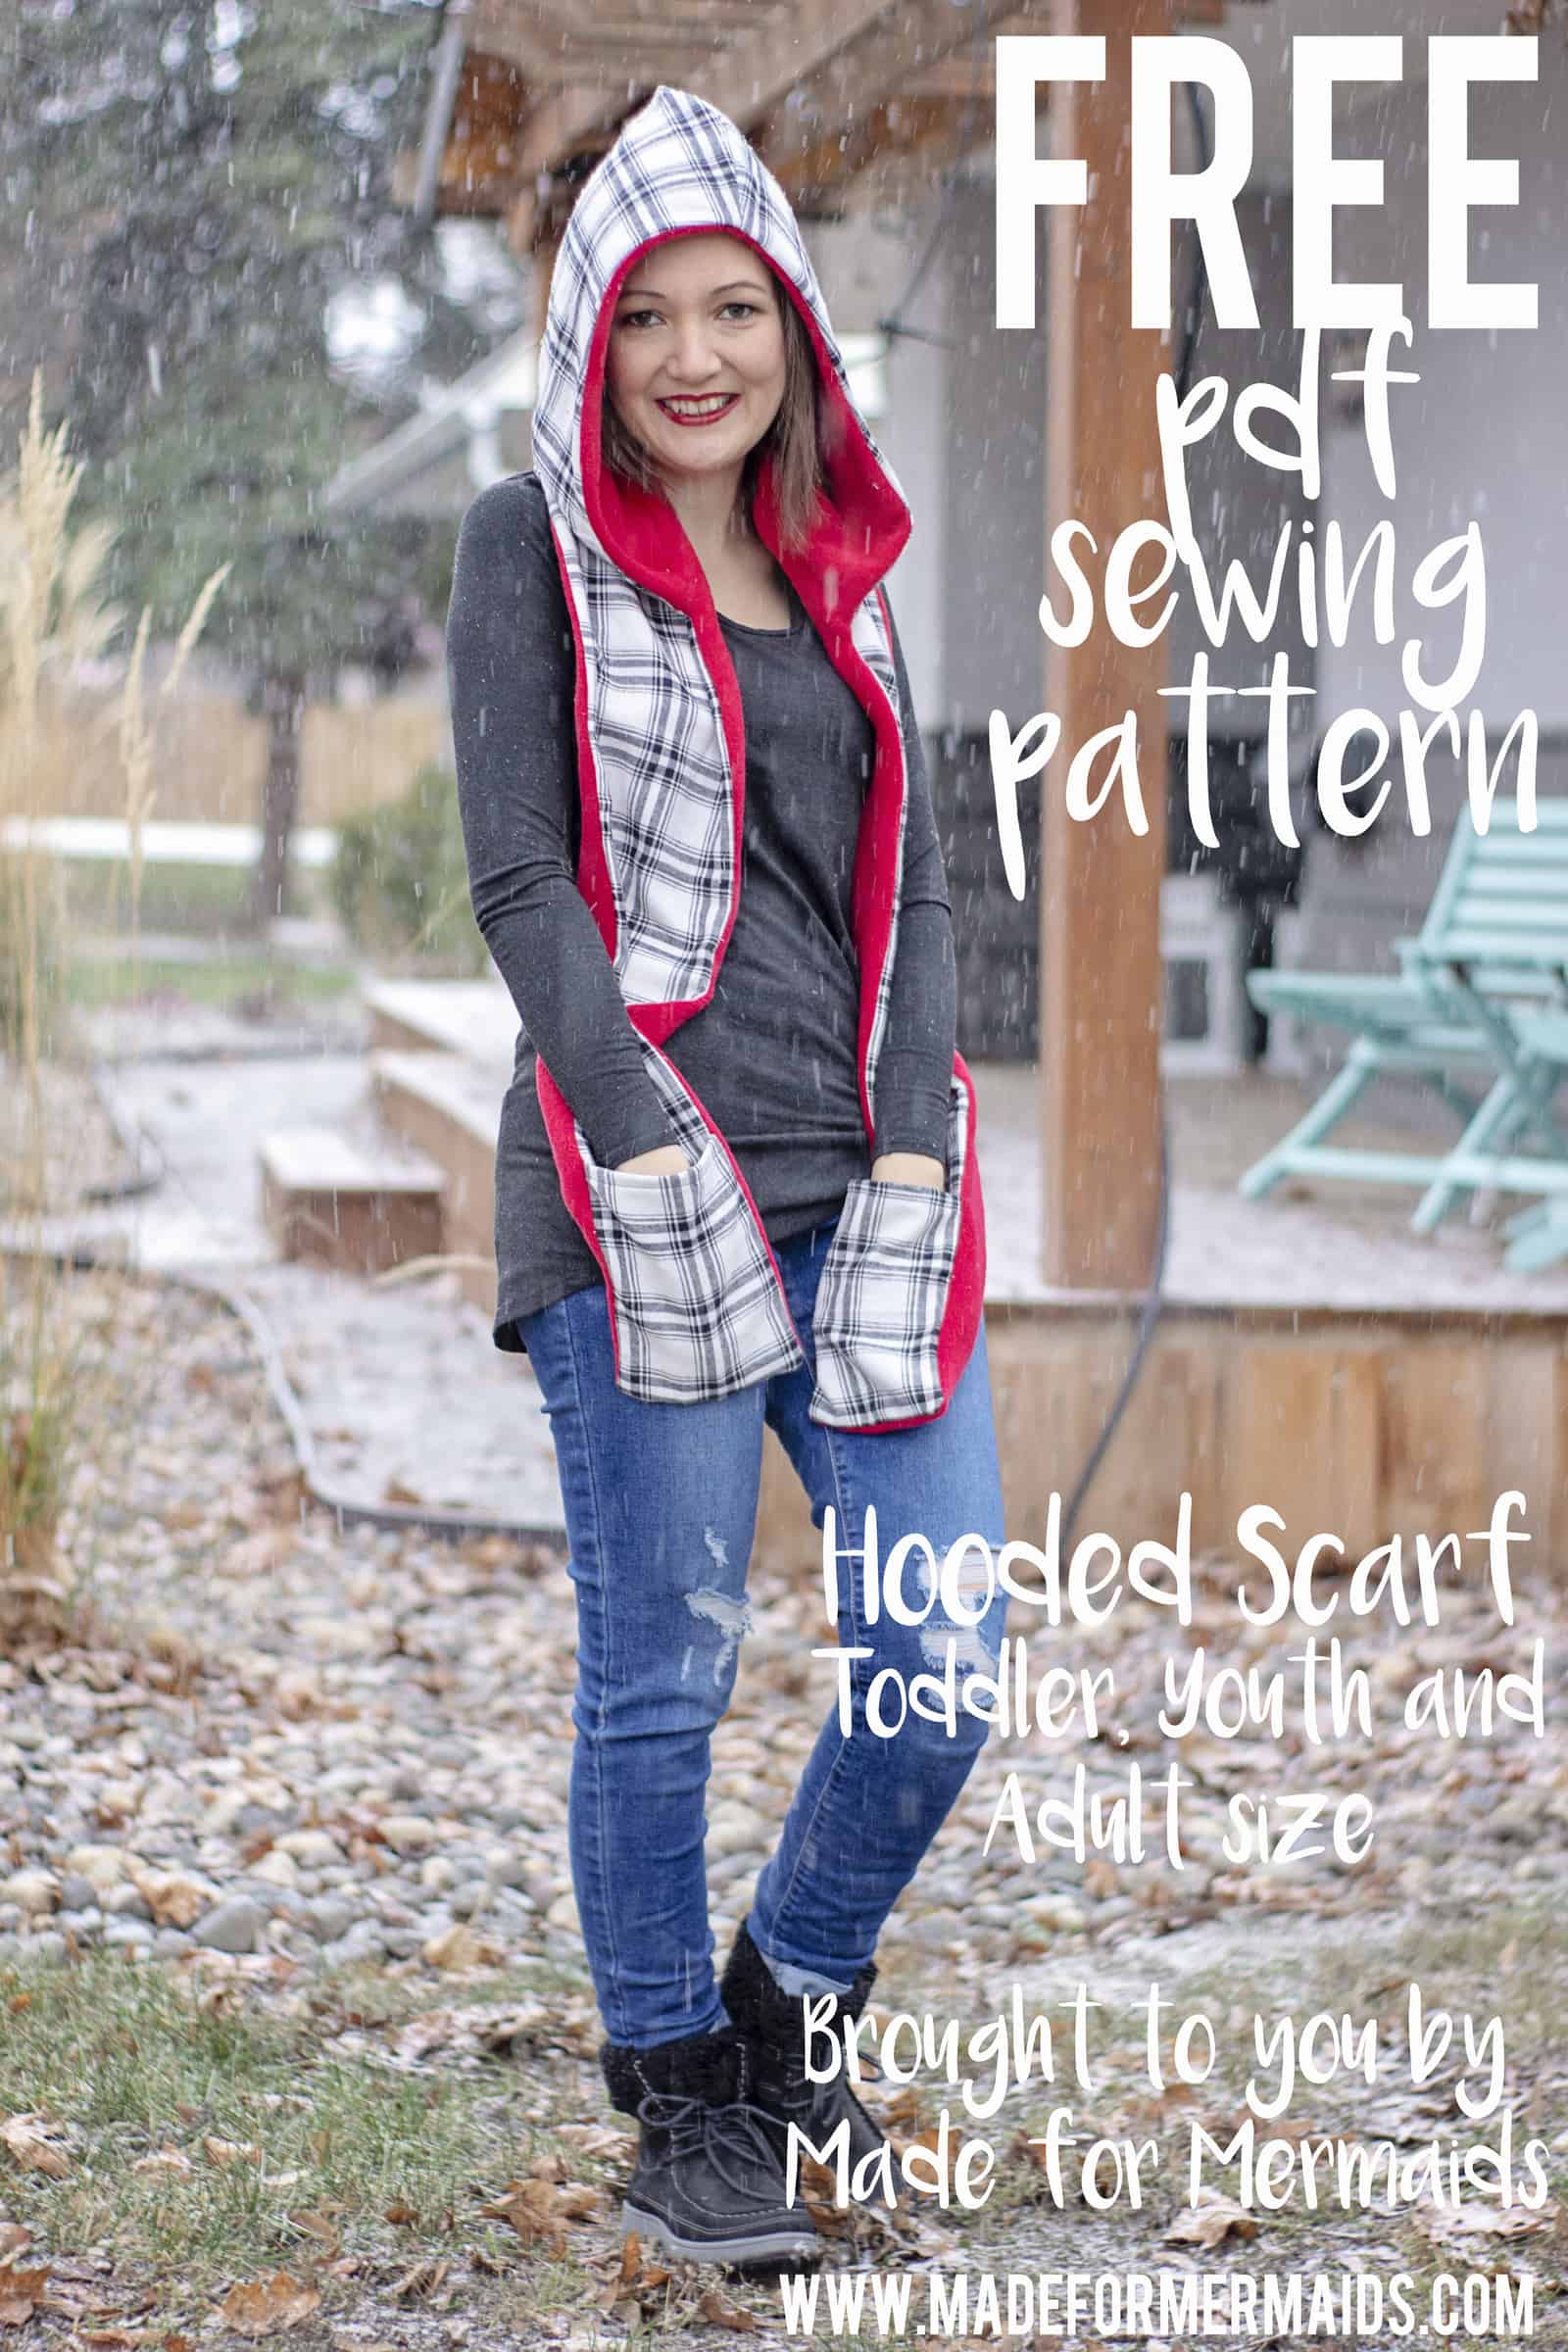 Make an Easy Hooded scarf - DIY pattern & tutorial - Sew Guide